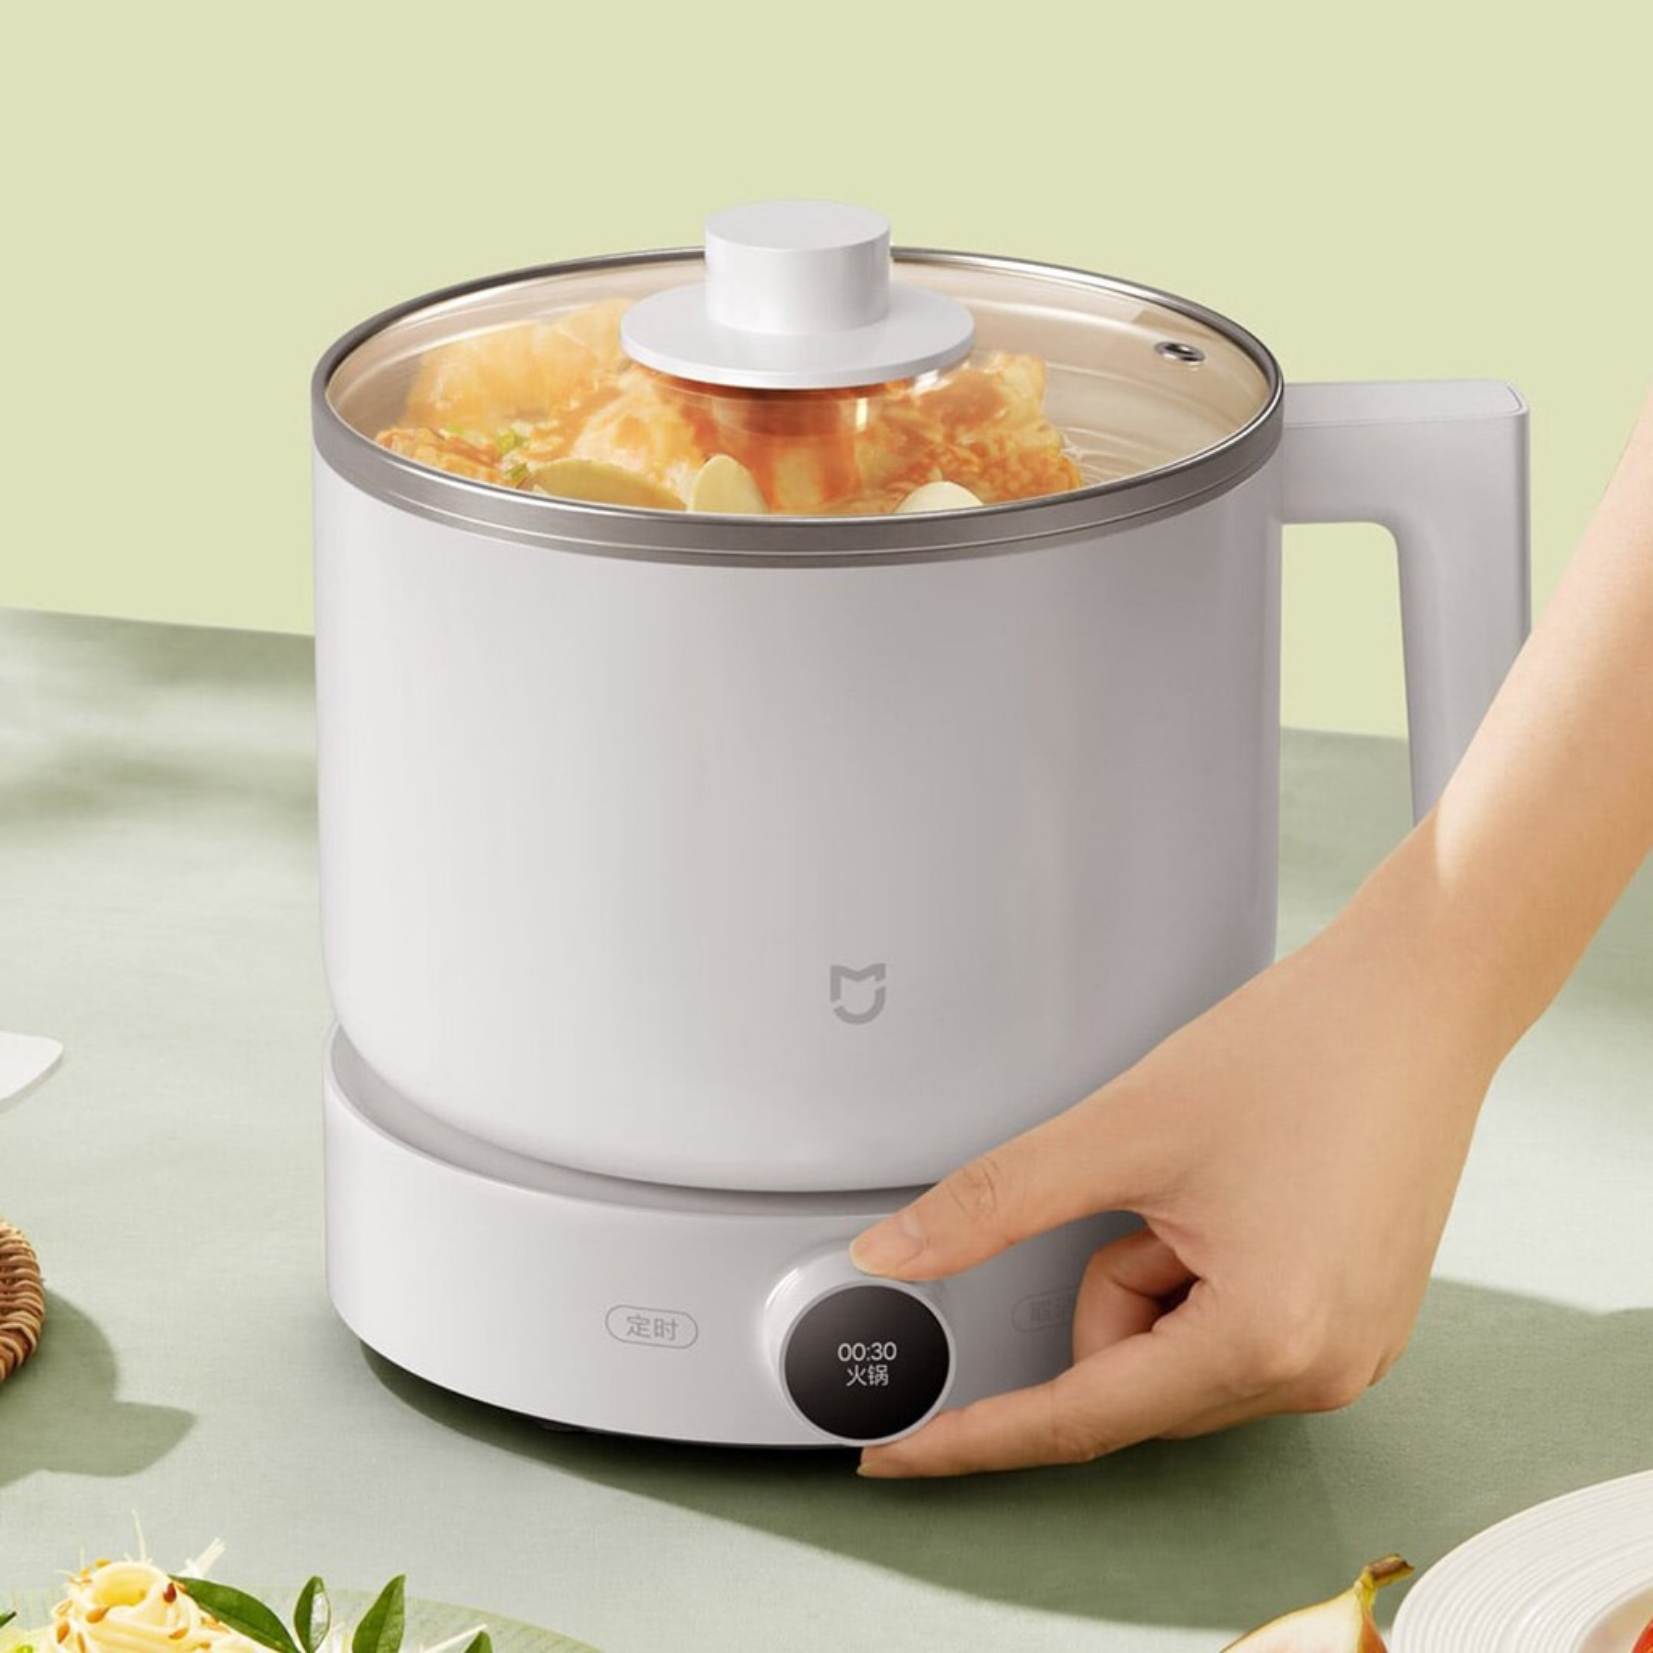 Xiaomi Smart Multi-Function Cooking Pot 1.5L - 1000W of Power | 9 Cooking Modes | Non Stick Material